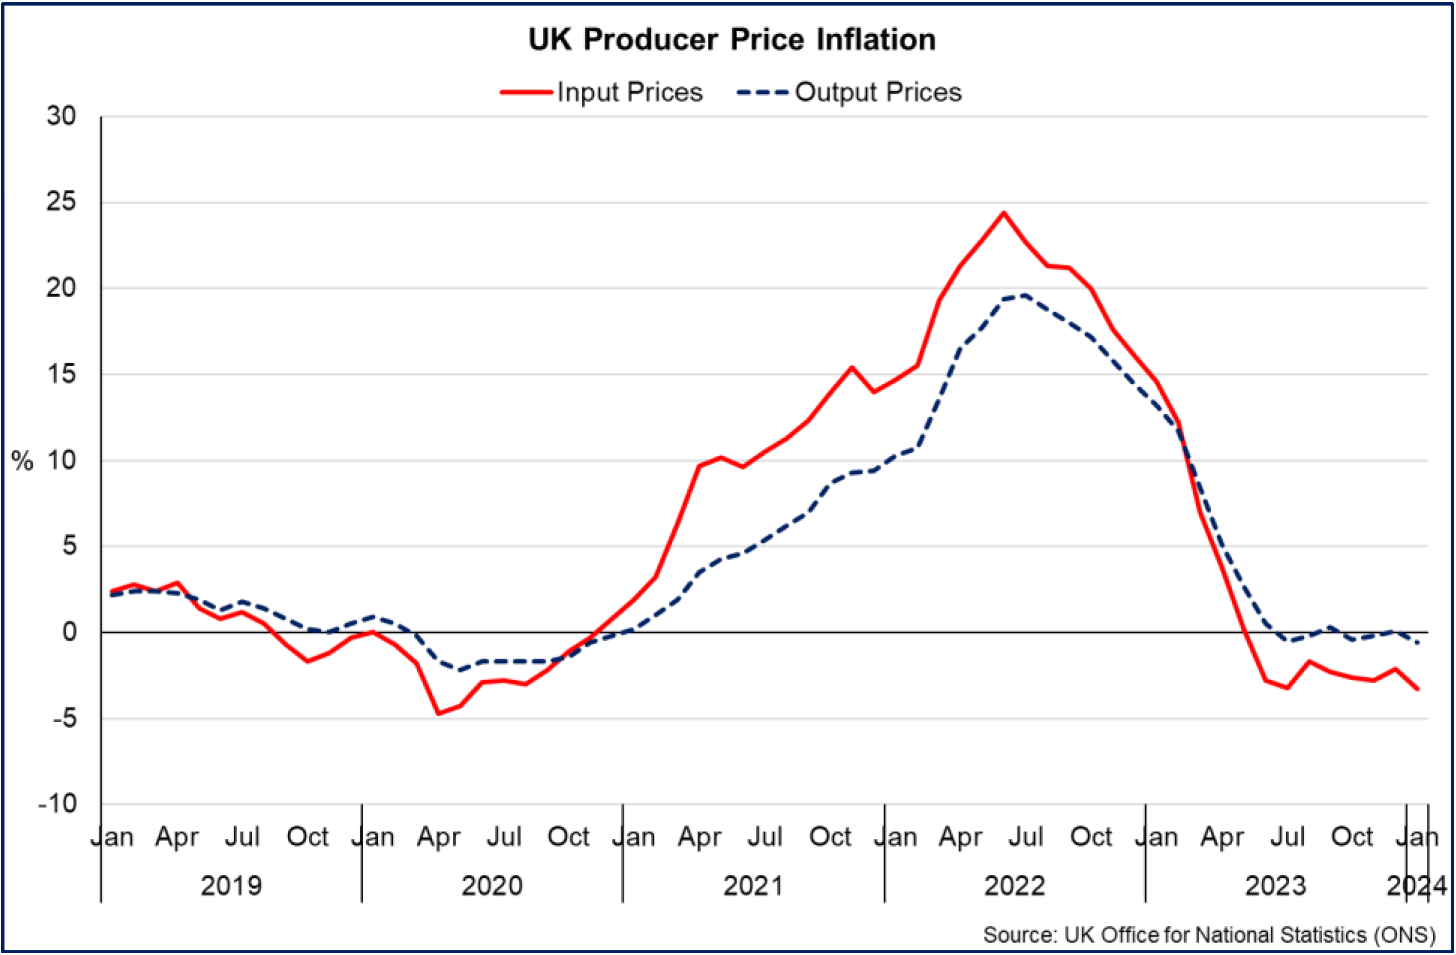 annual producer price inflation rates remained negative in January 2024